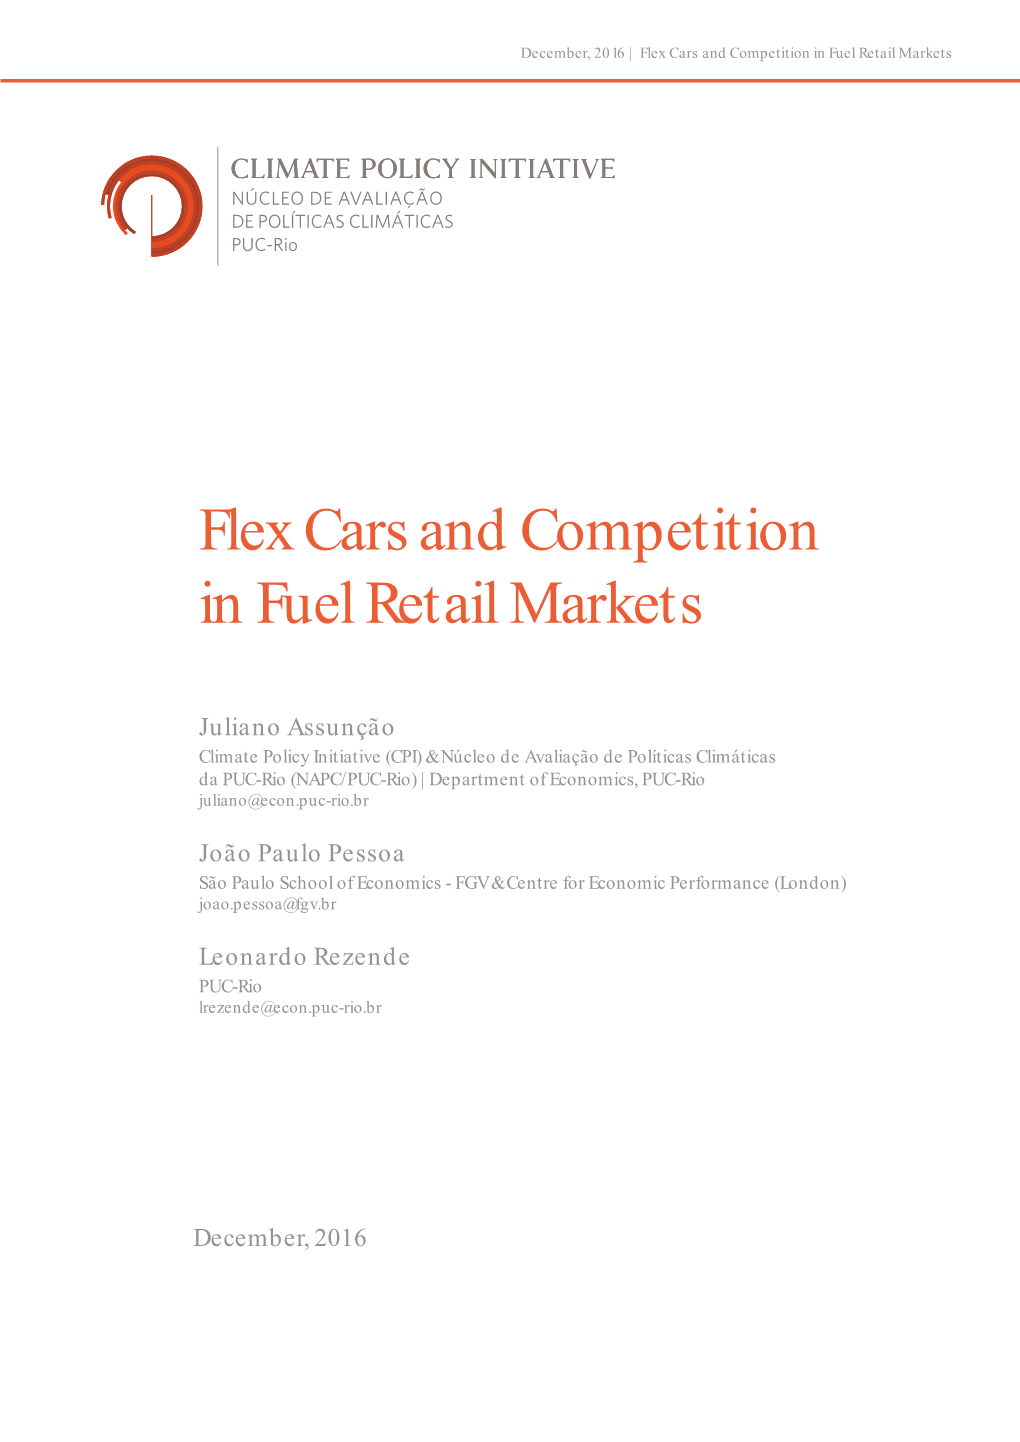 Flex Cars and Competition in Fuel Retail Markets